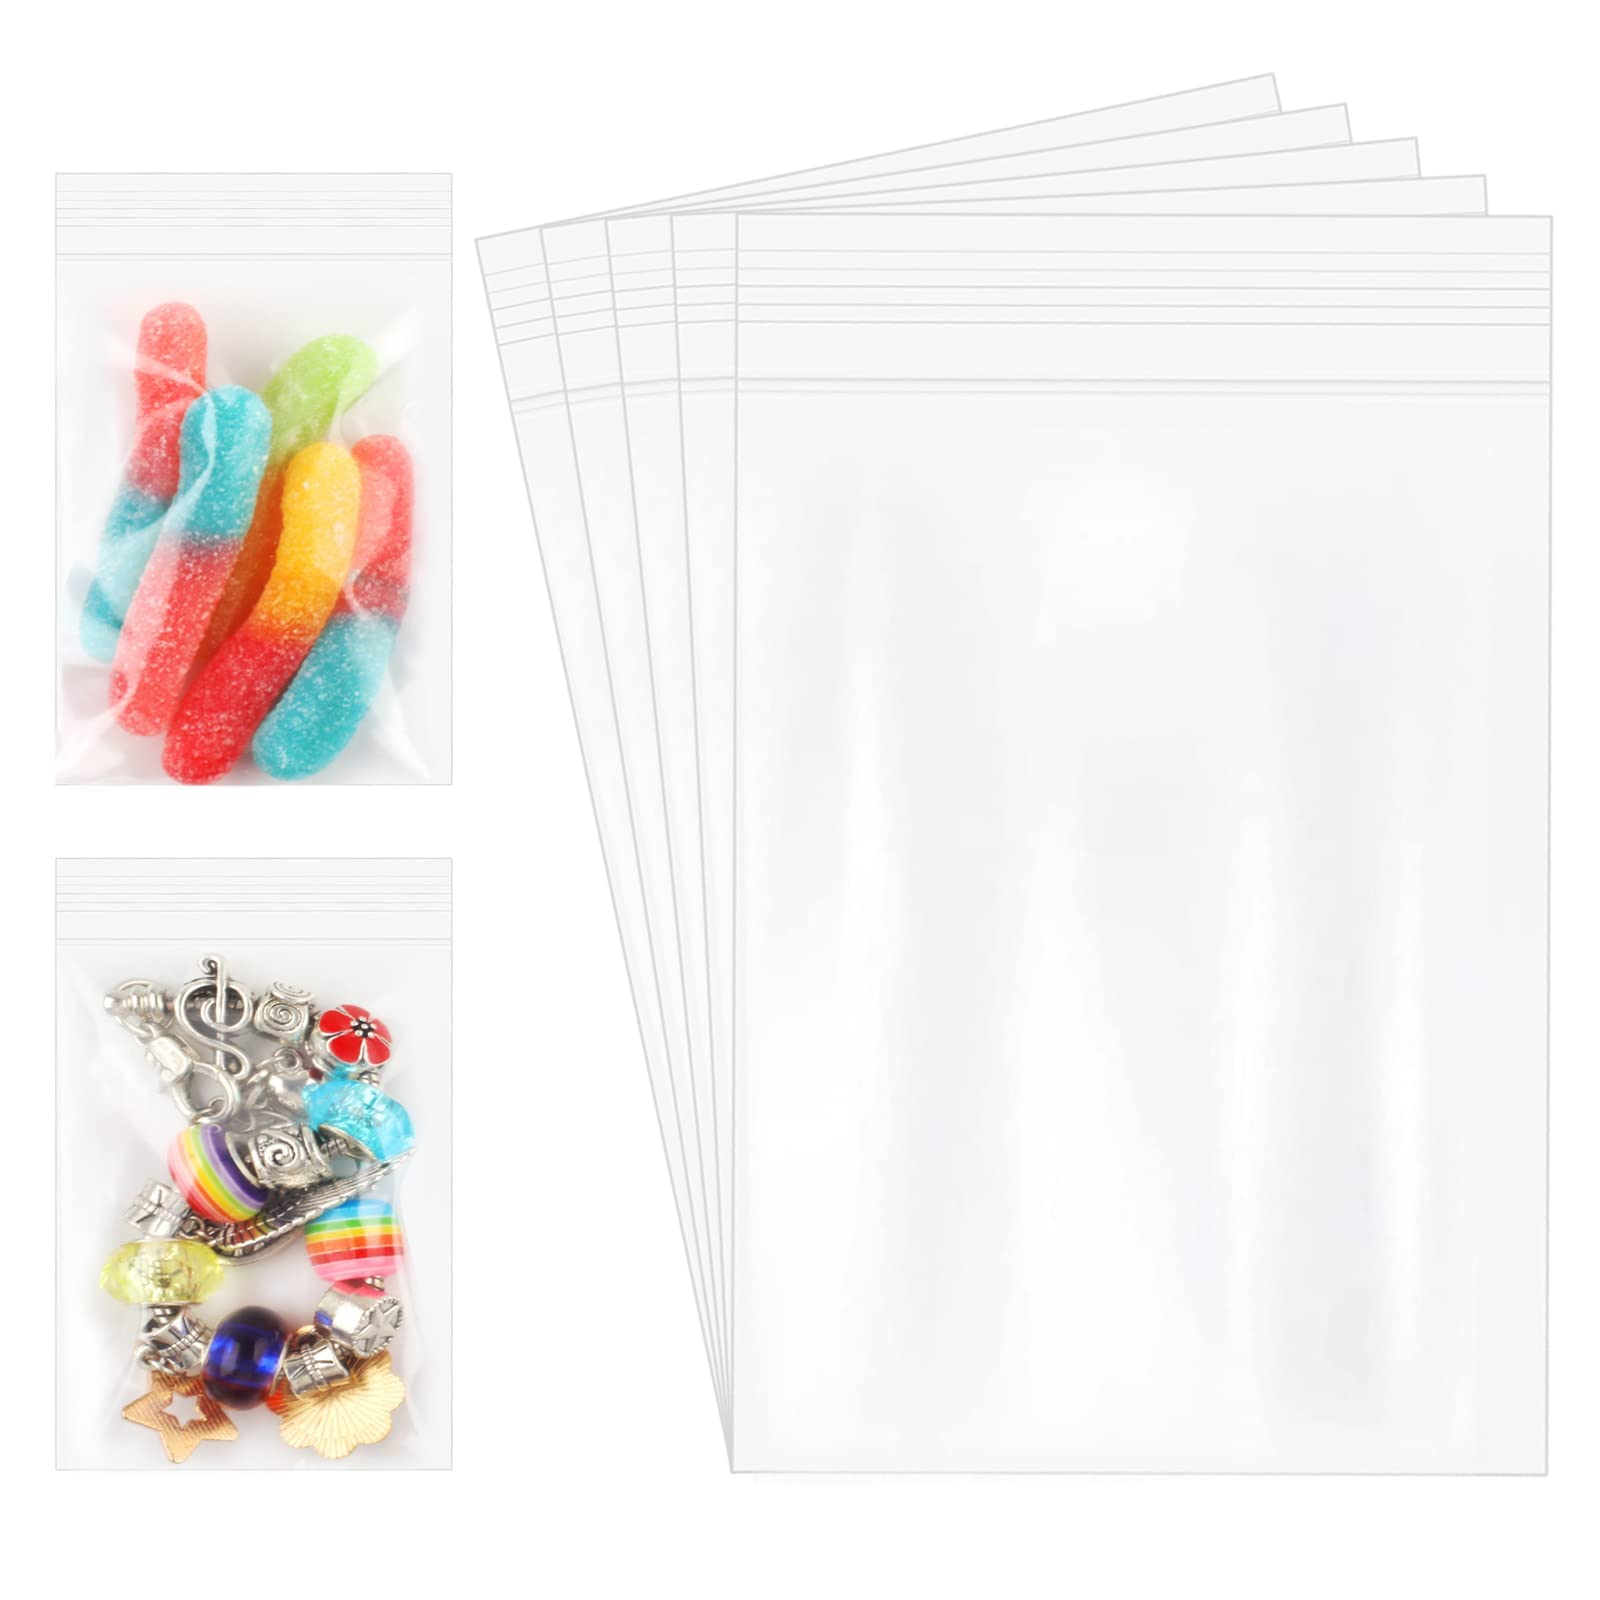 200 Pack 2 Mil Thick PP Bags for Jewelry, 4 Assorted Sizes, 2x3 3x3 3x5 4x6  Inch. 50 Counts Each Size, Clear Durable Food Grade Safe. Resealable